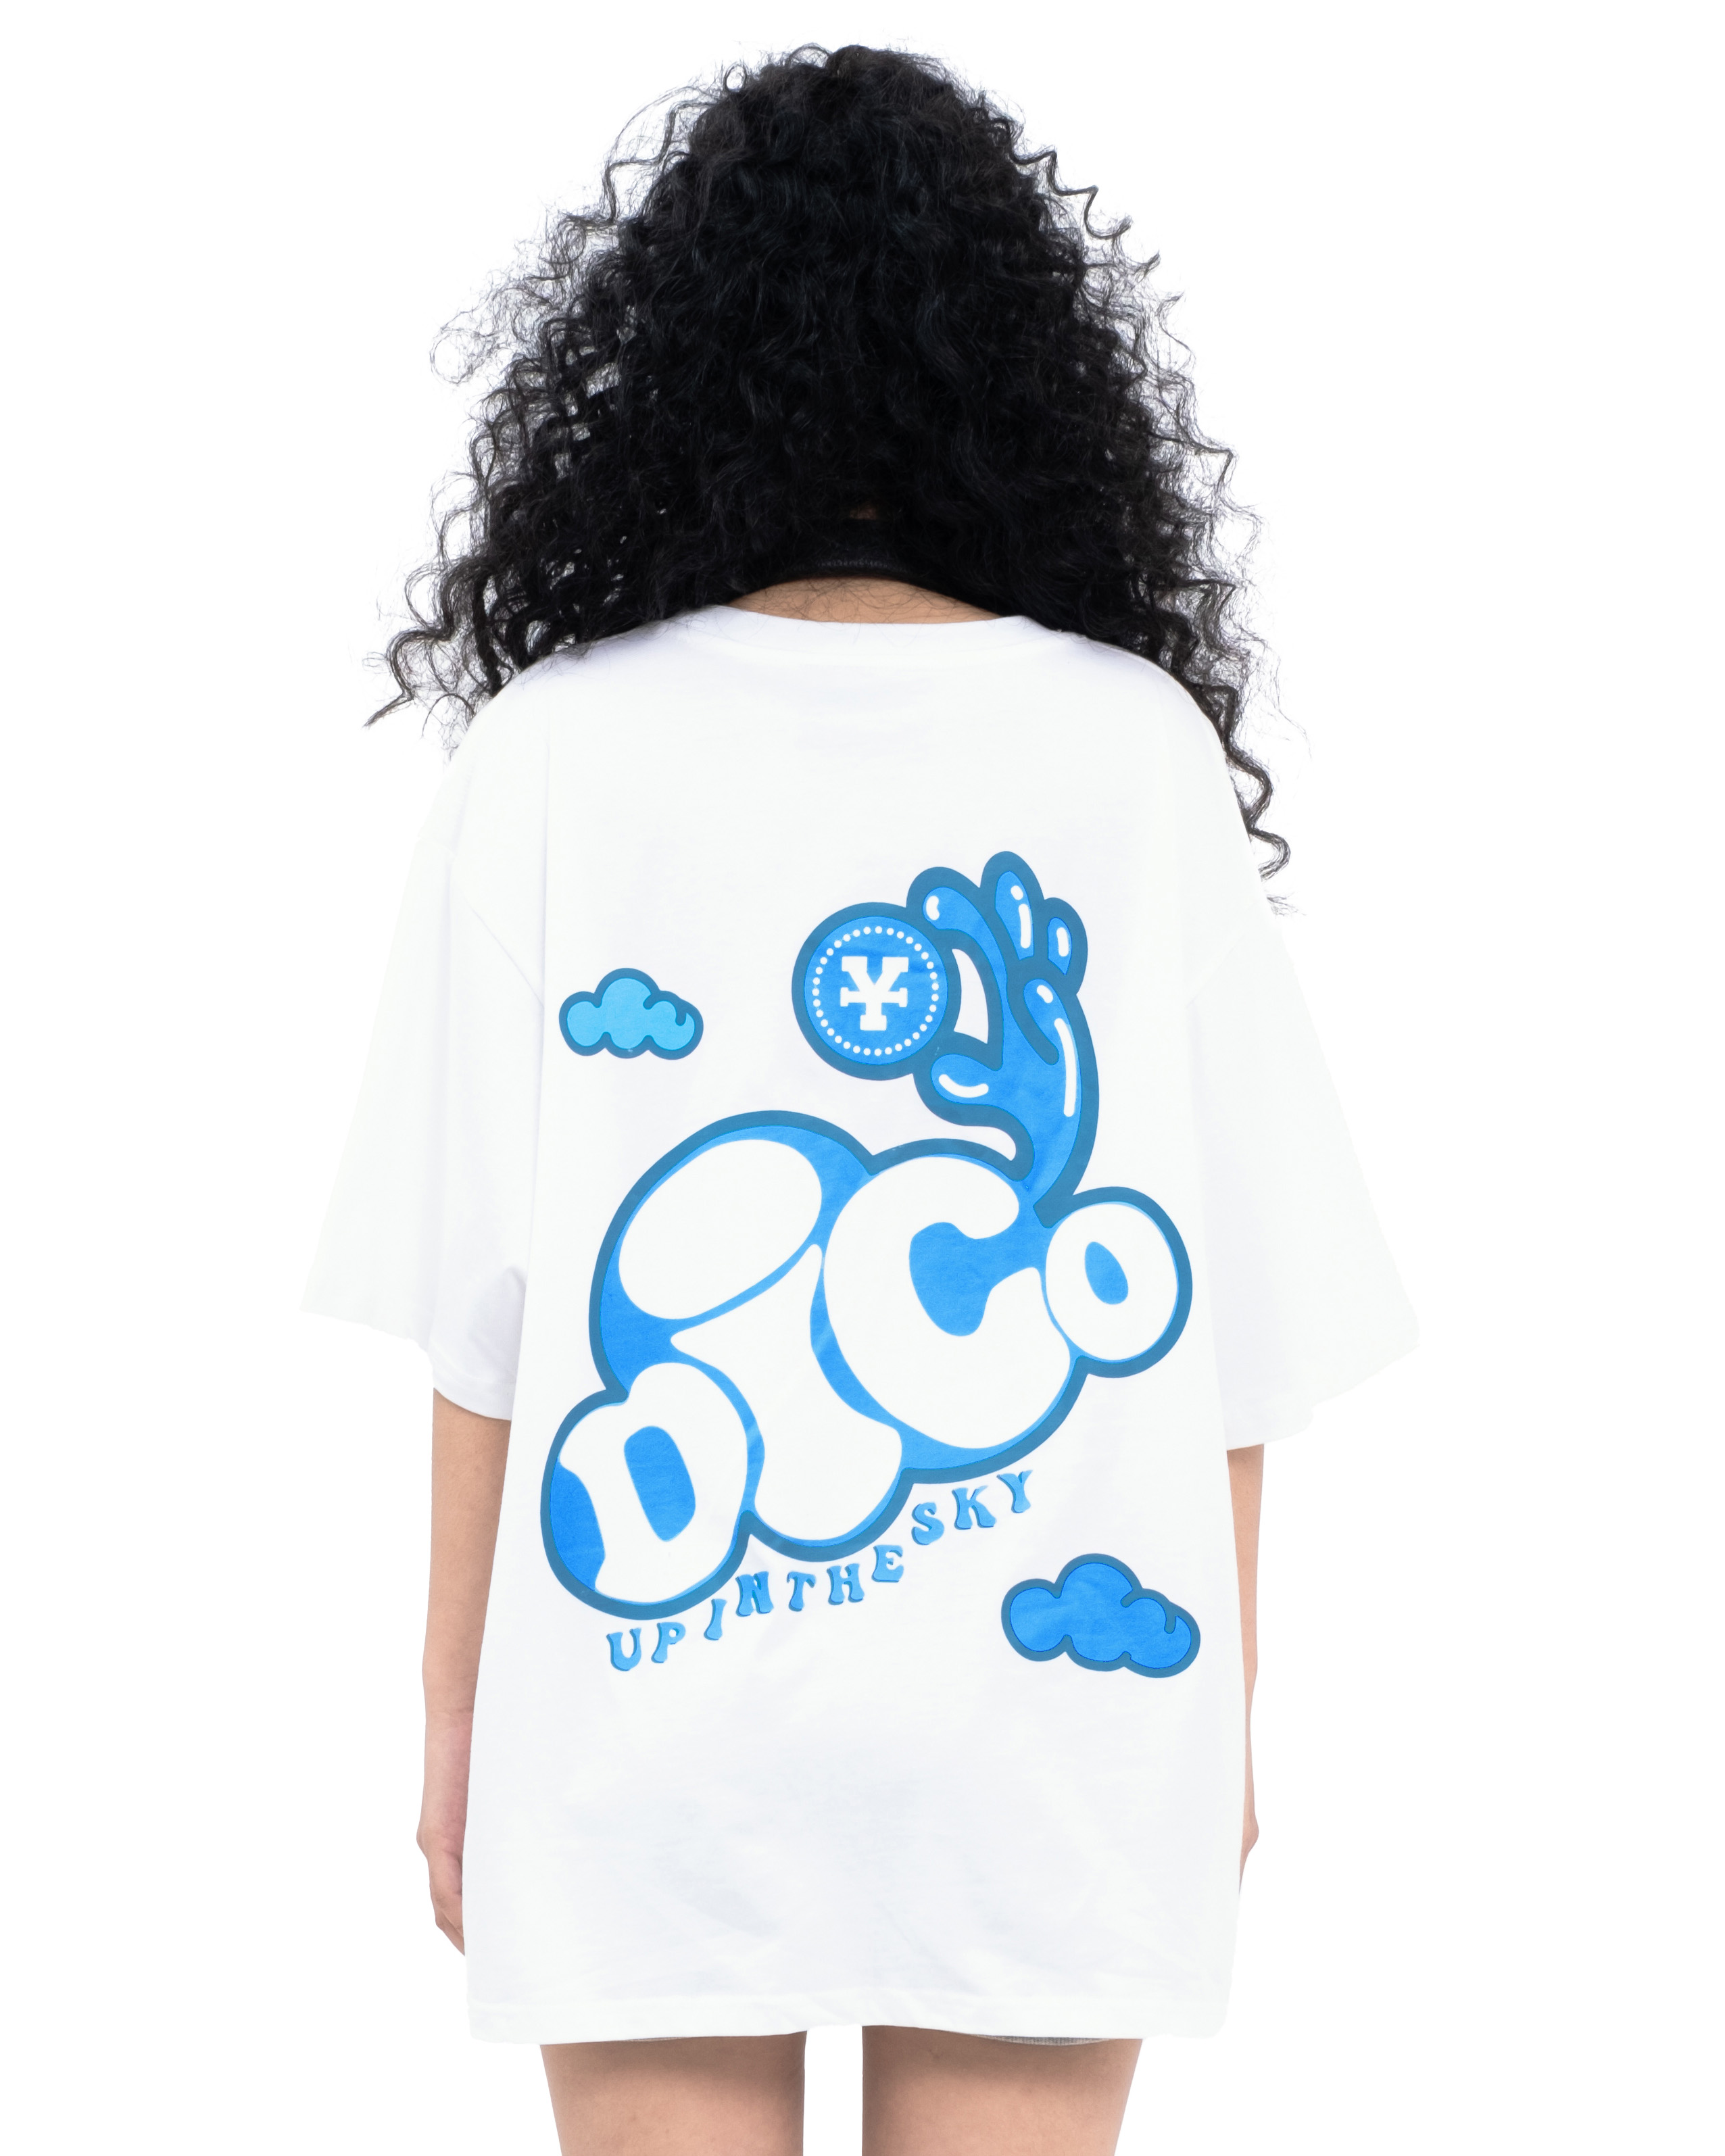 DirtyCoins Up In The Sky T-shirt - White